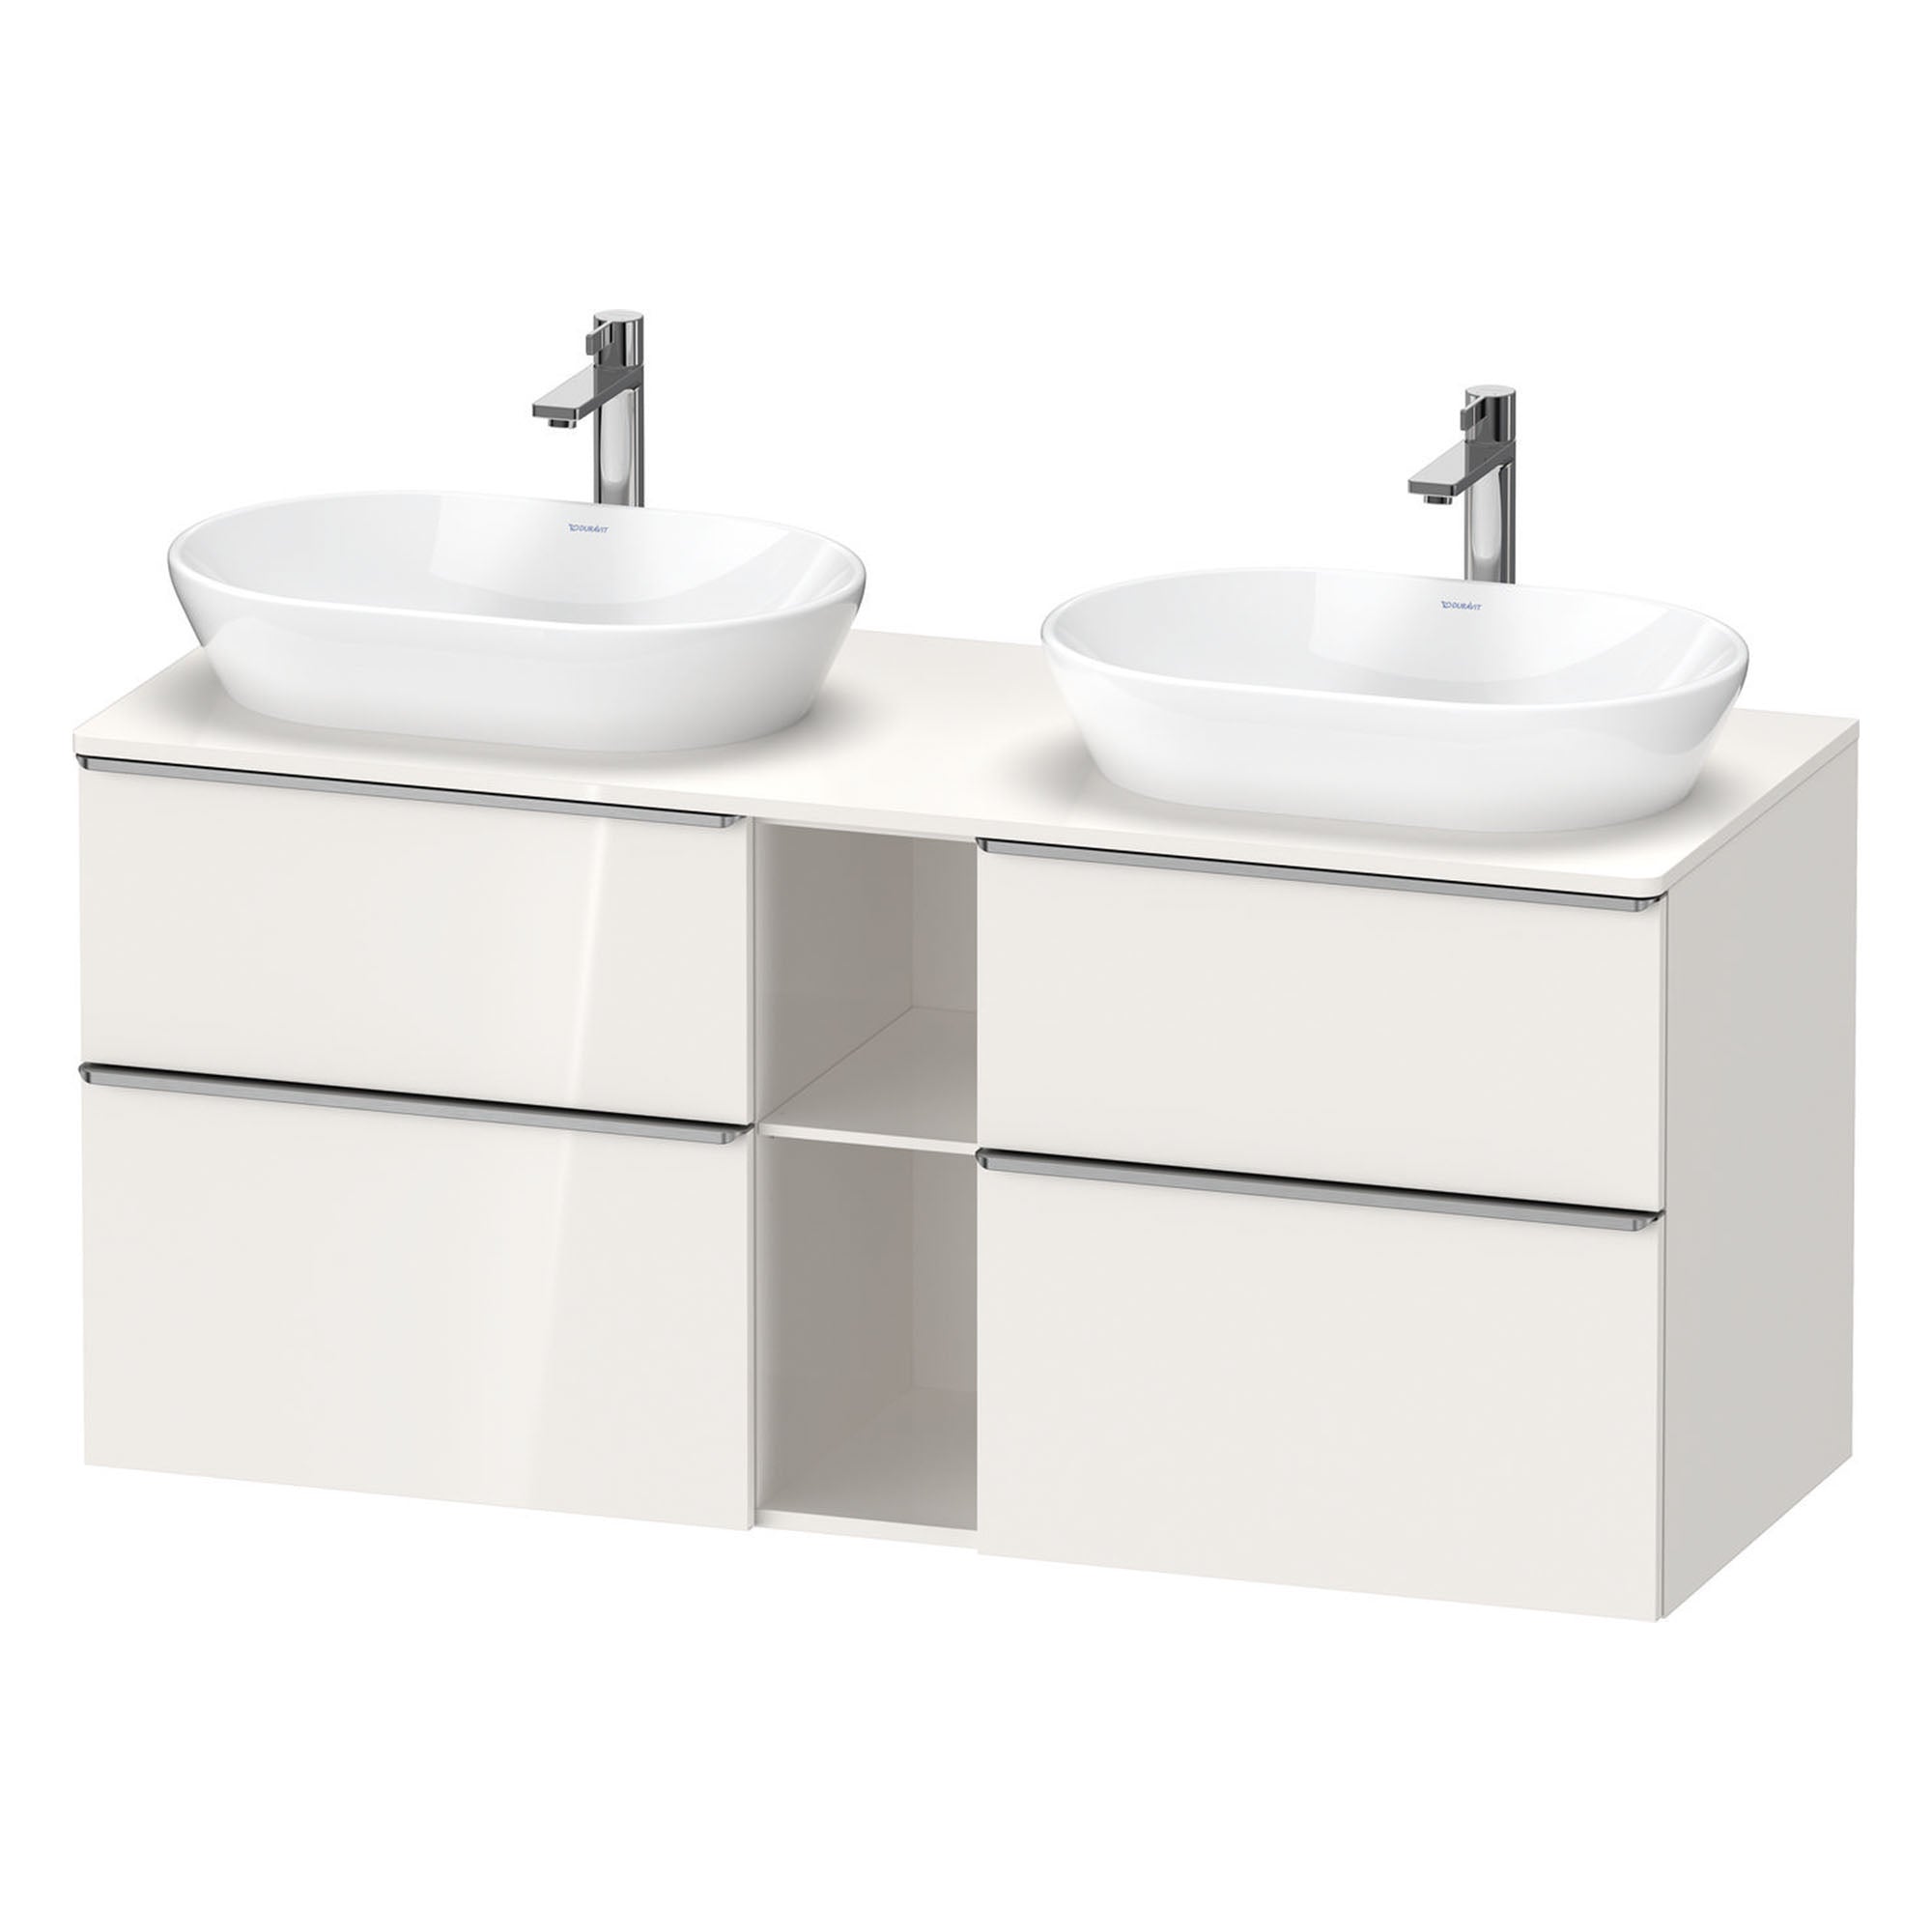 duravit d-neo 1400 wall mounted vanity unit with worktop 2 open shelves white gloss stainless steel handles